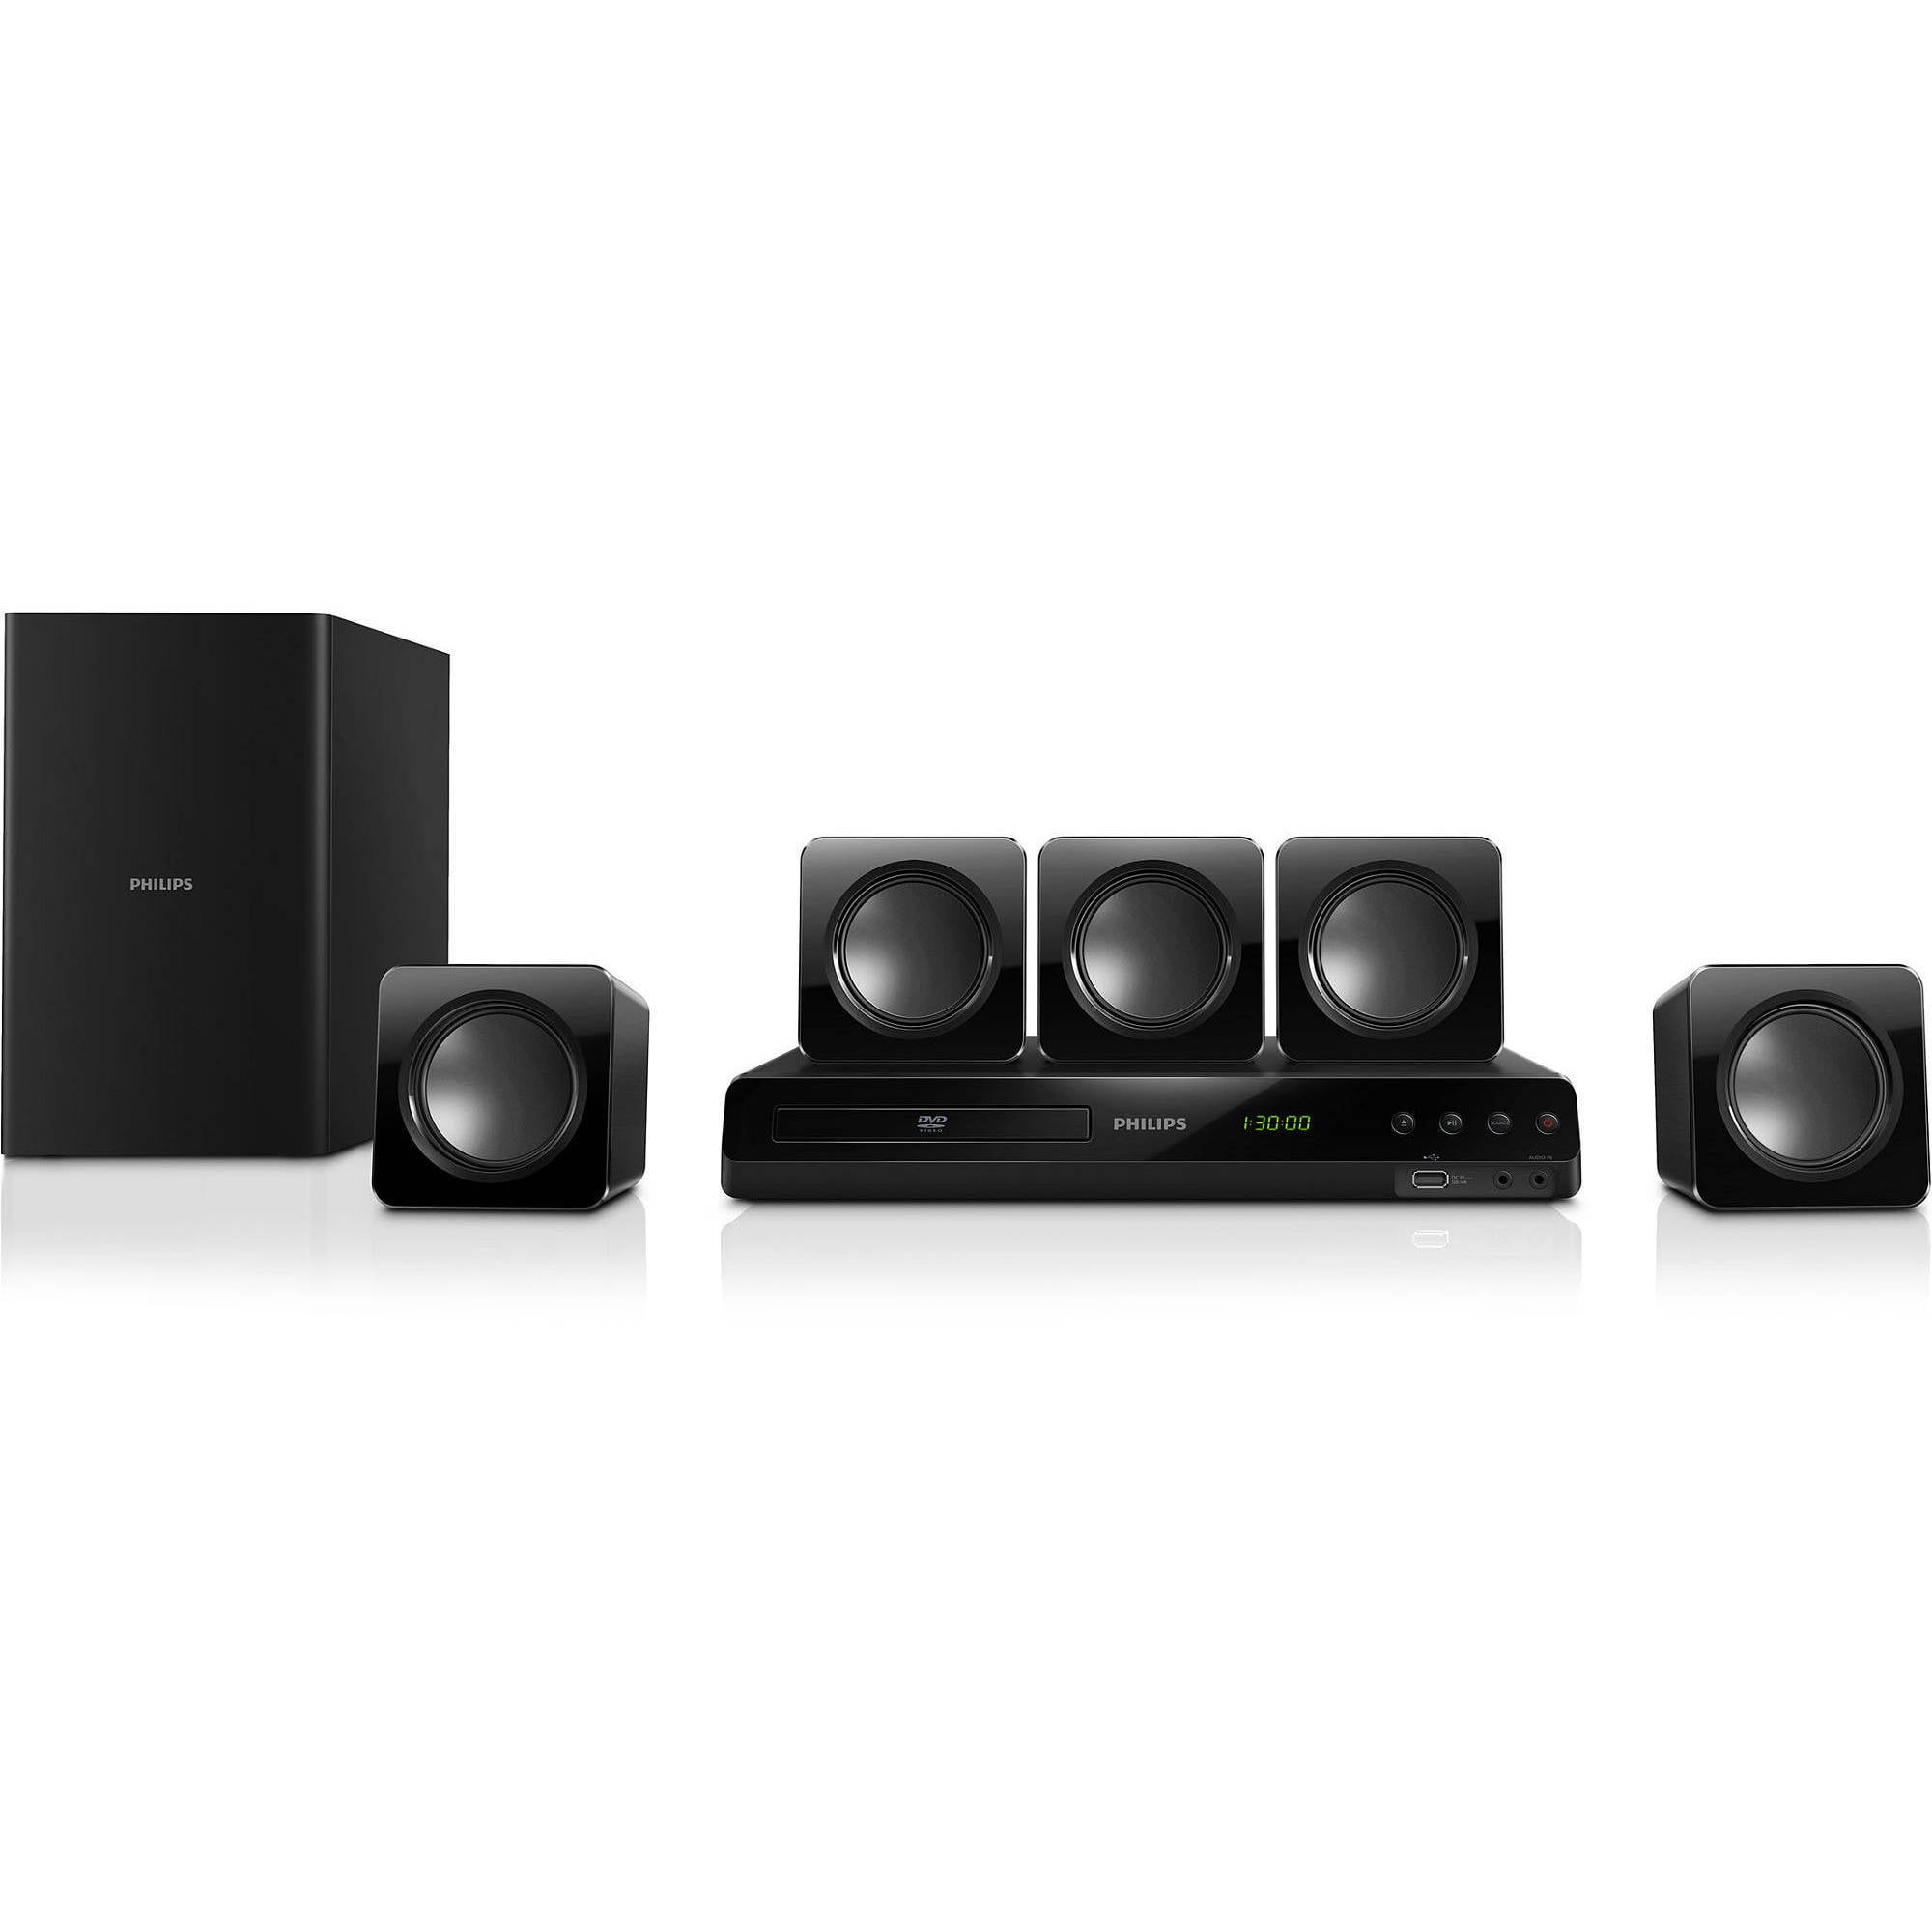 Restored Philips HTD3514/F7B 5.1-Channel Home Theater System - Walmart.com